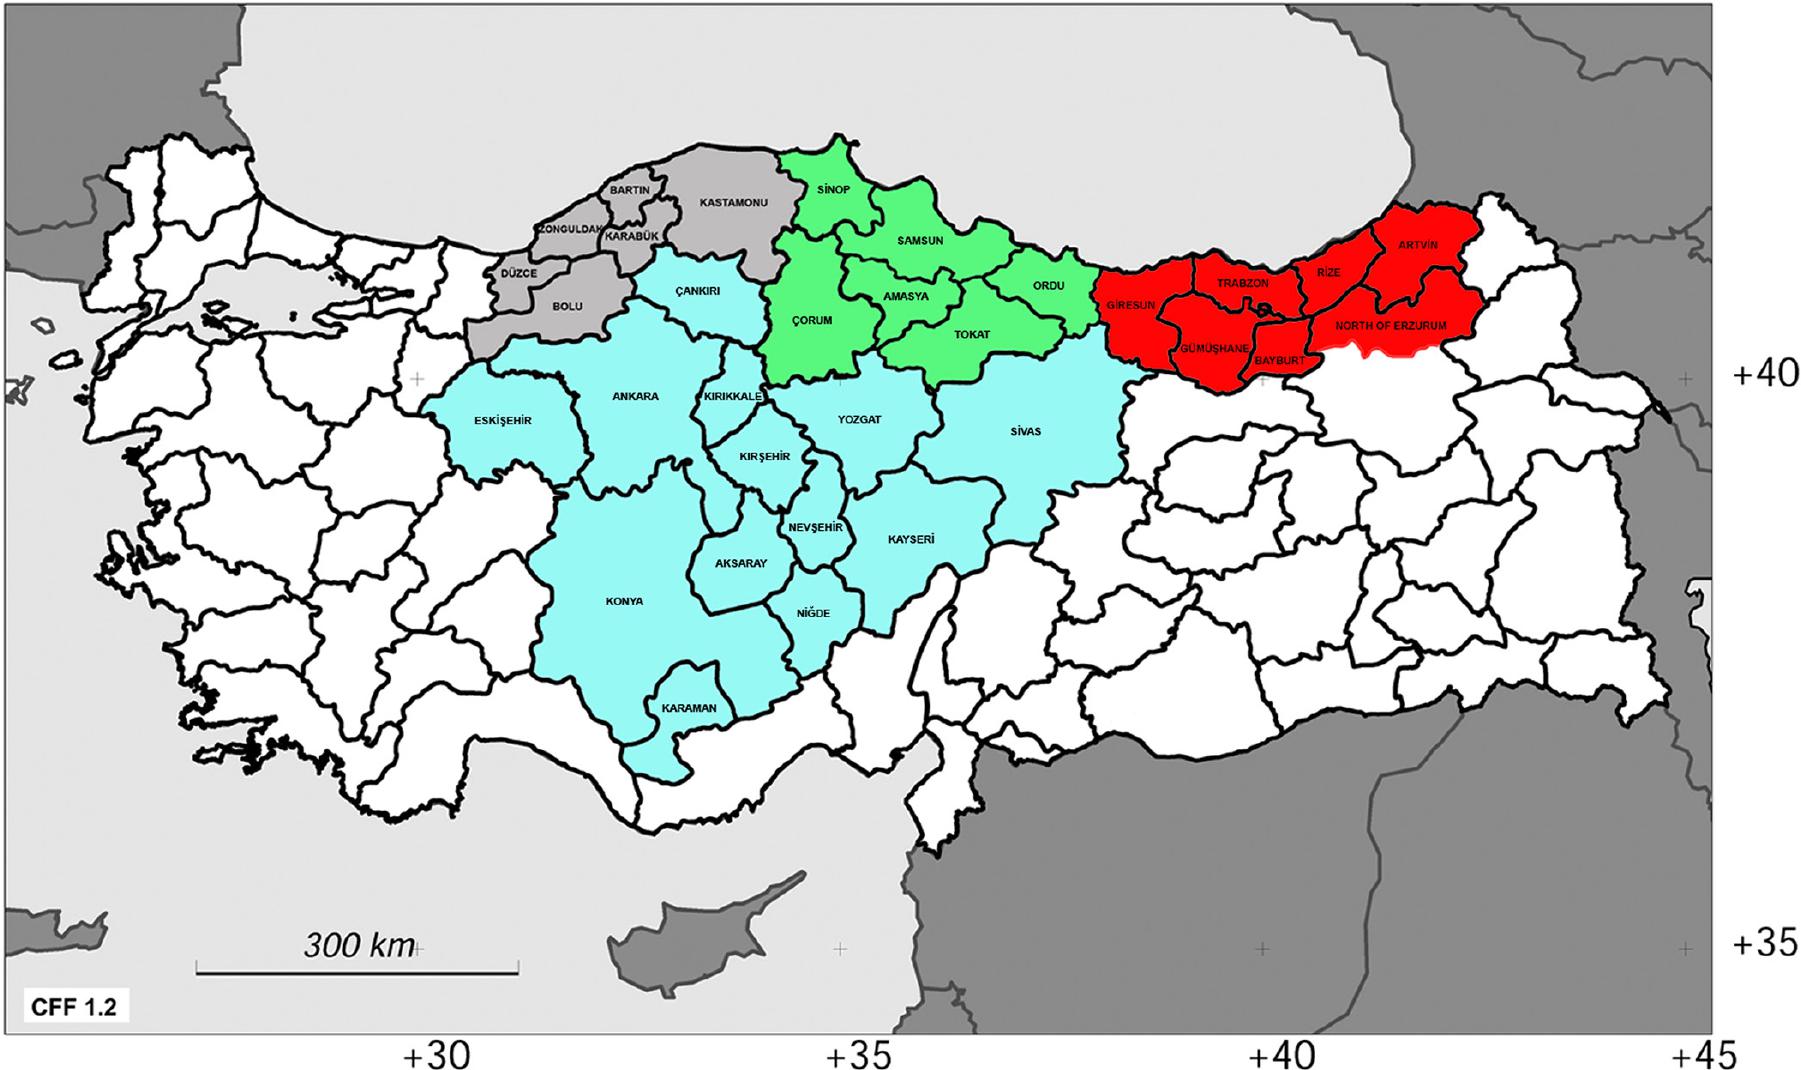 eleteridae coleoptera of the eastern black sea region of turkey fauna some ecological evaluations and zoogeographical composition